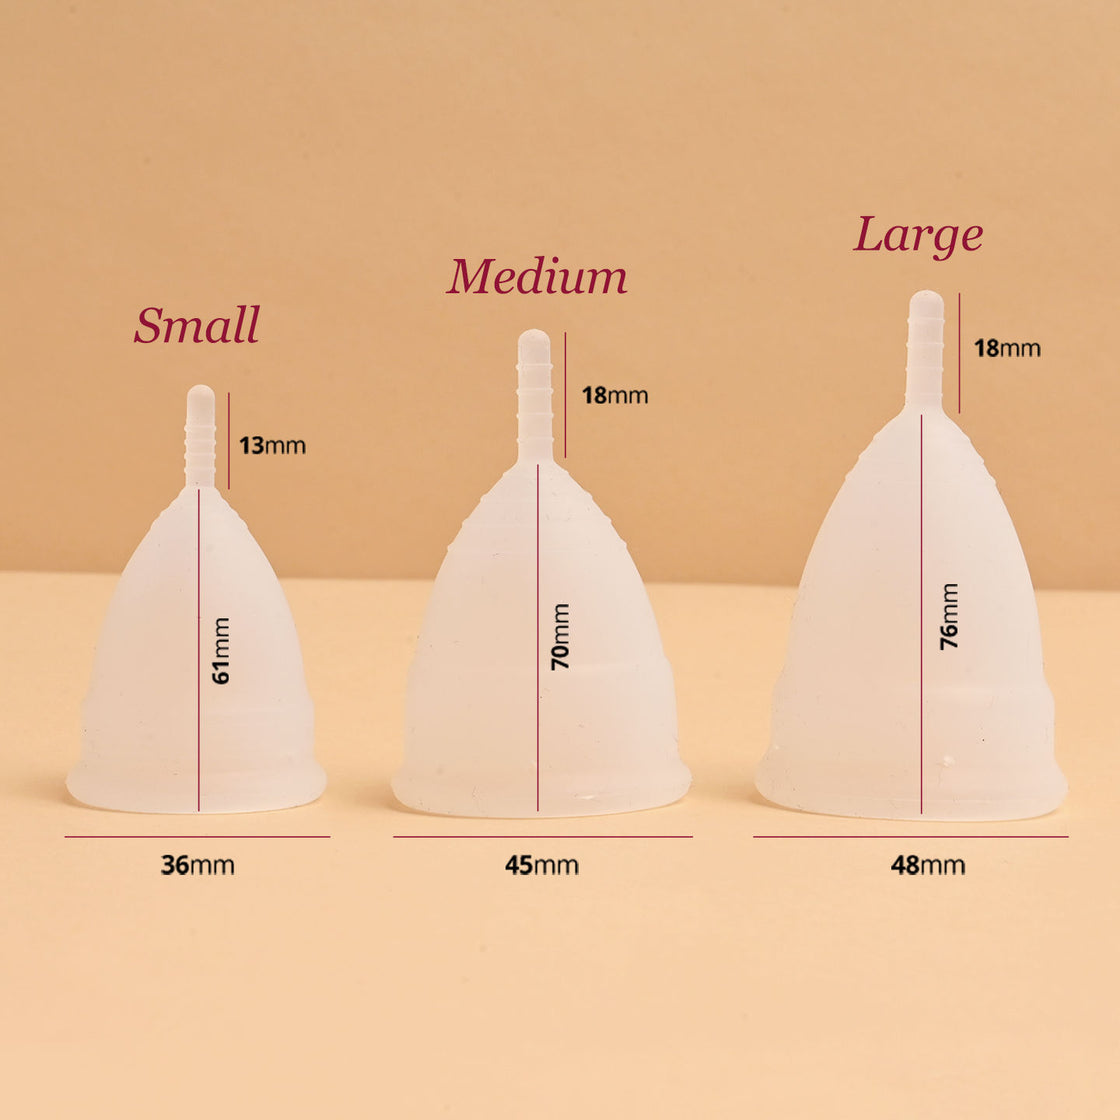 Carmesi Reusable Menstrual Cup for Women - Large Size - With Free Pouch